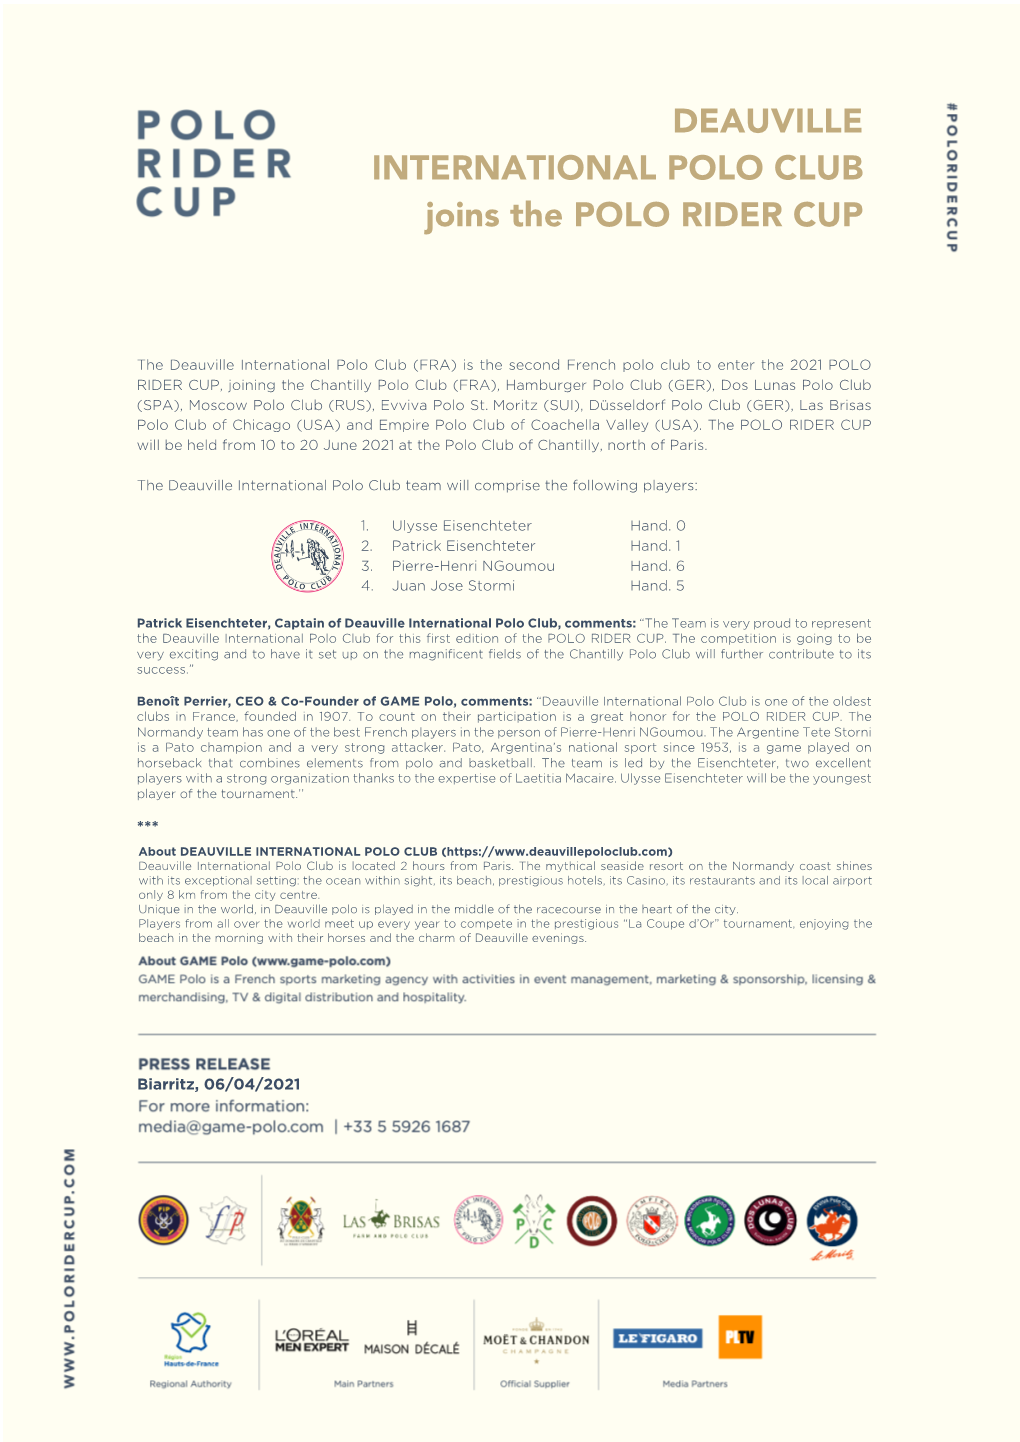 DEAUVILLE INTERNATIONAL POLO CLUB Joins the POLO RIDER CUP